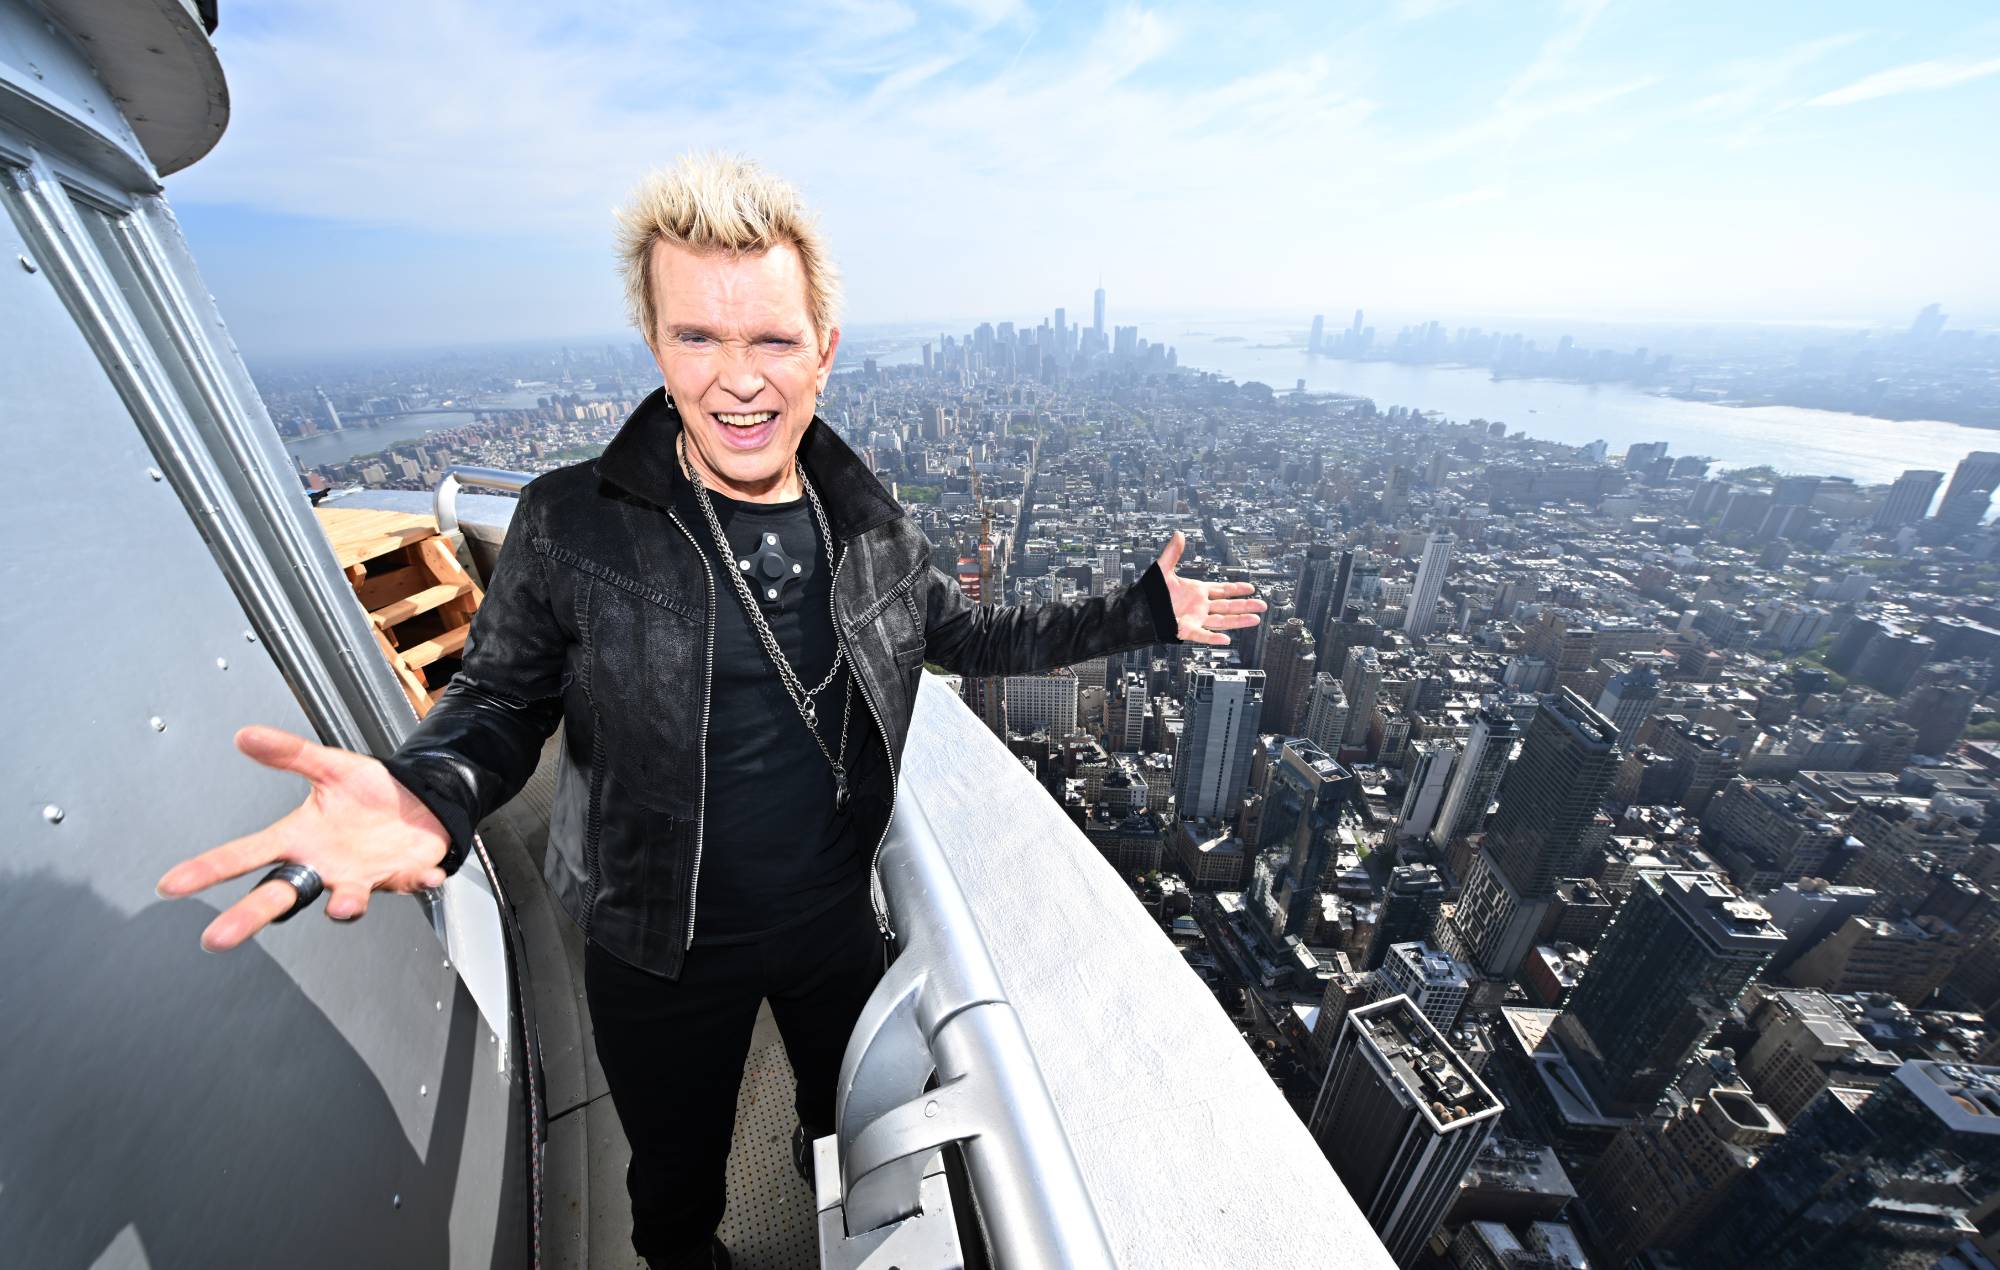 Billy Idol poses for a photo at the top of the Empire State Building to celebrate 40 Years of 'Rebel Yell' on April 30, 2024 in New York City. (Photo by Roy Rochlin/Getty Images for Empire State Realty Trust)